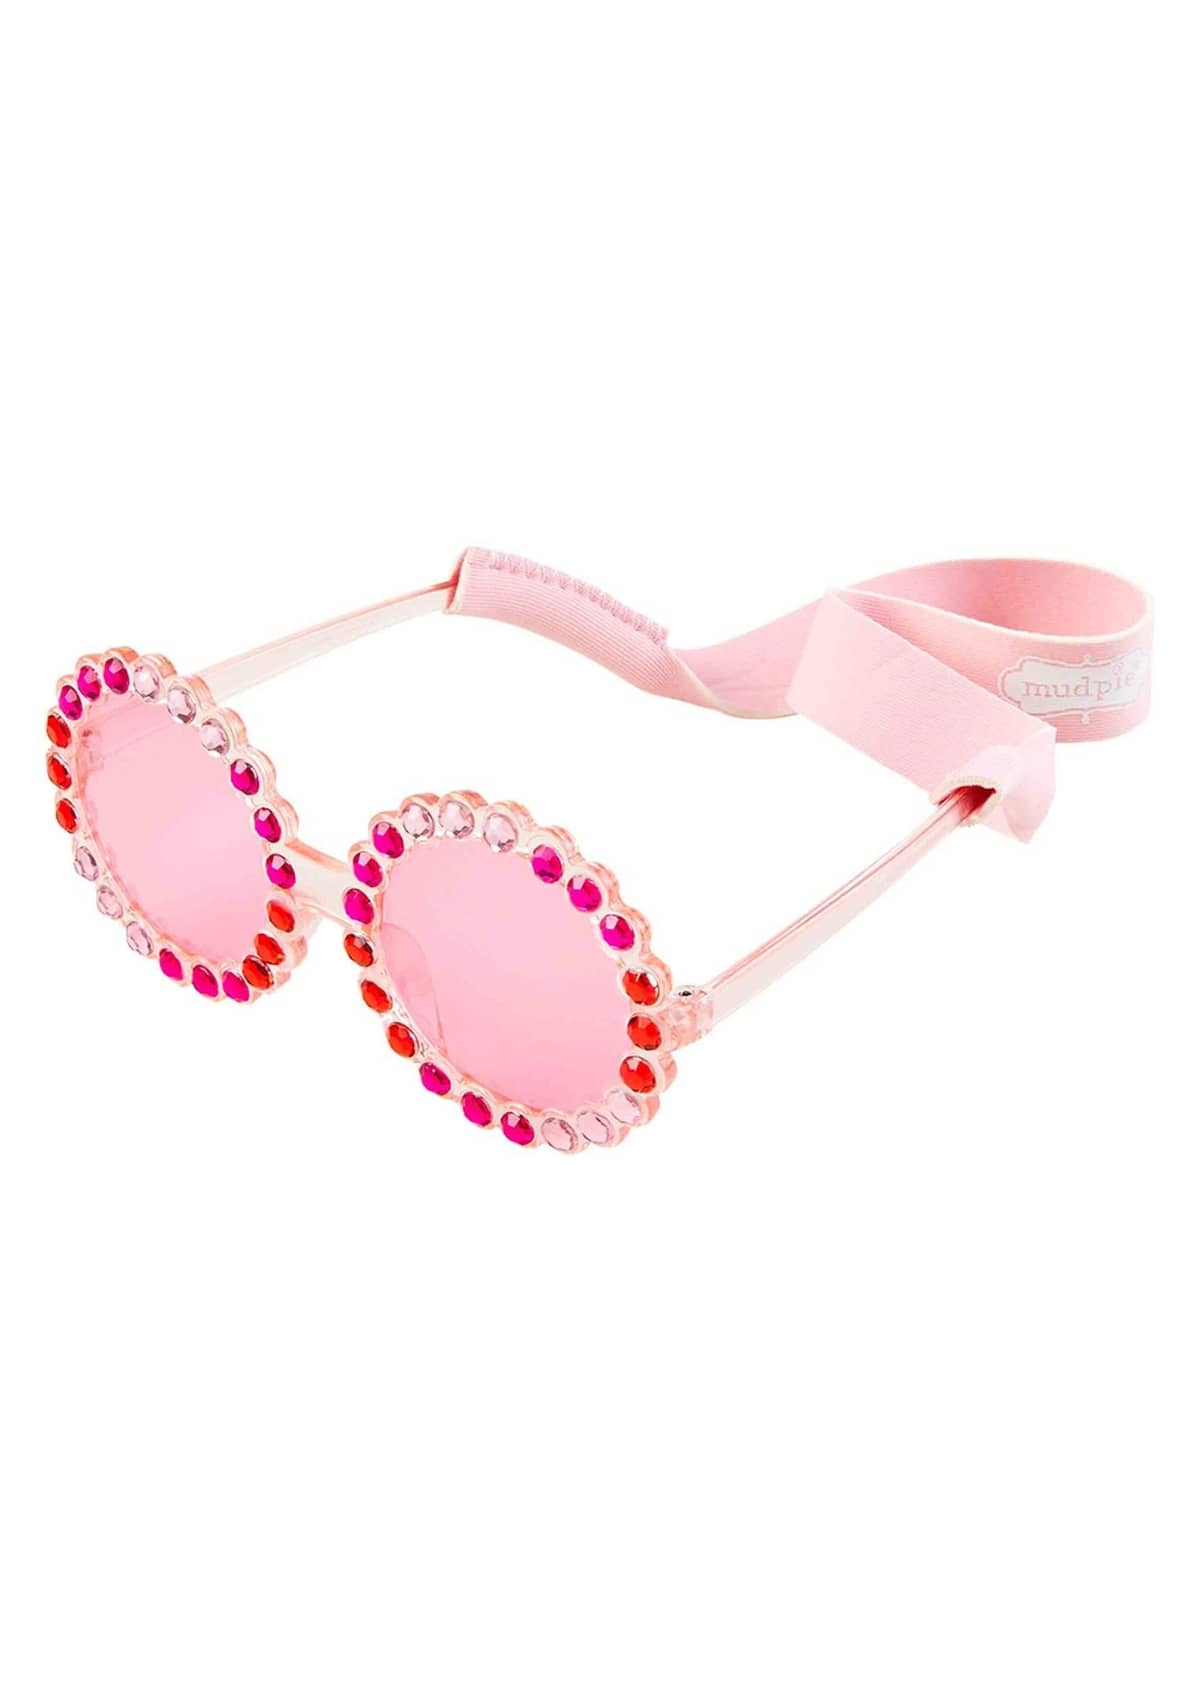 Accessories For the Littles-Sunglasses For the Littles--Ruby Jane.